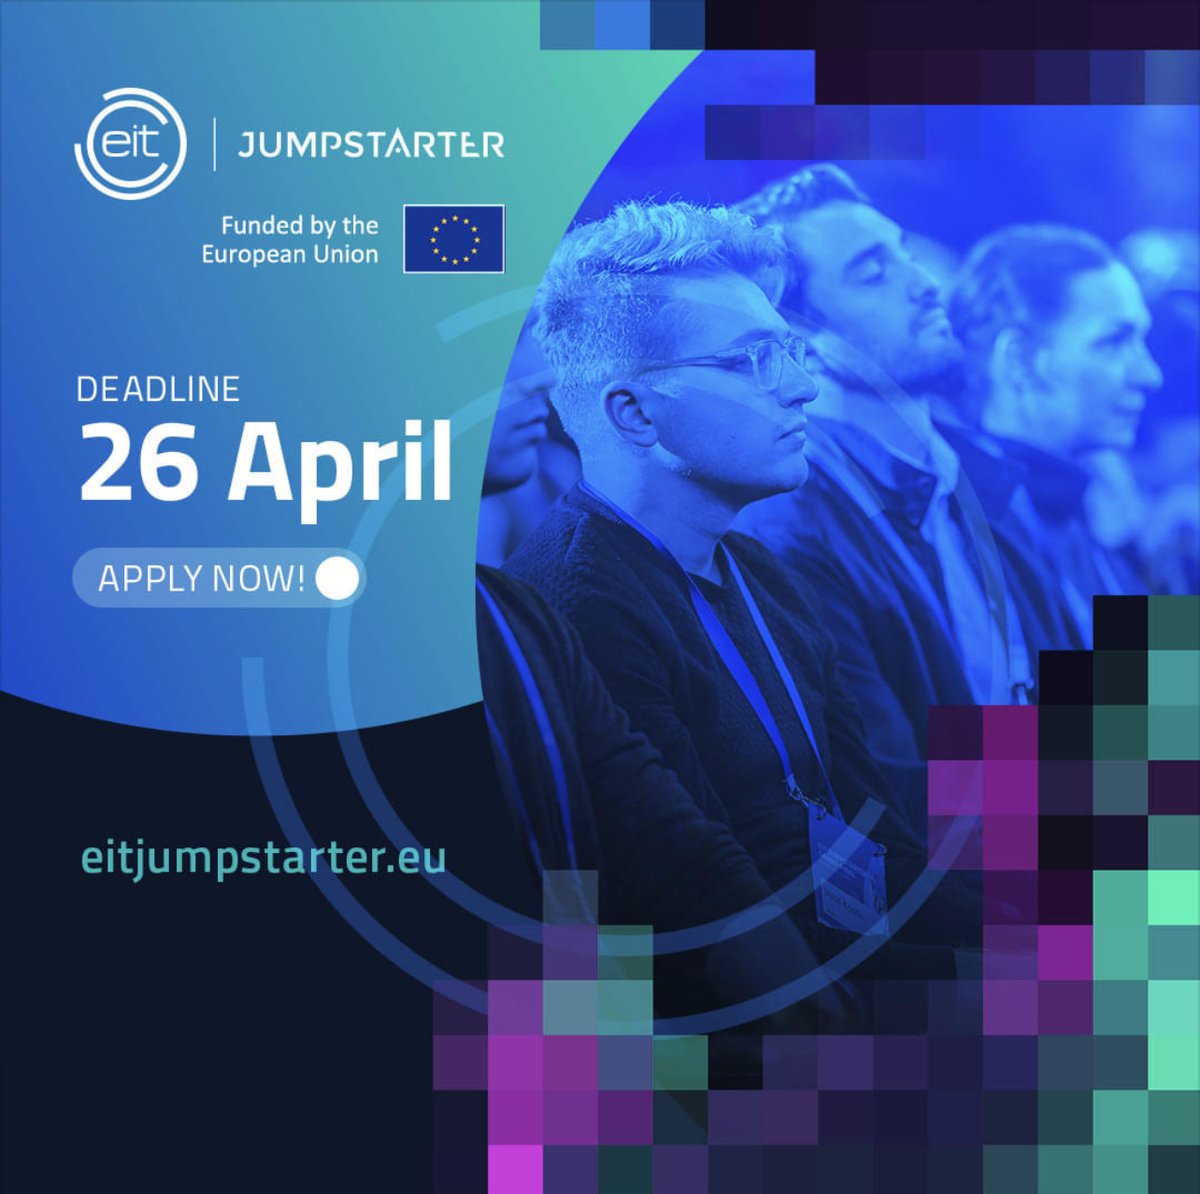 📷 Did you know? There's no fee required to join EIT Jumpstarter! Access invaluable mentorship, expert guidance, and a supportive community of fellow entrepreneurs without any financial burden. Seize this opportunity and apply now! 📷
apply.eitjumpstarter.eu